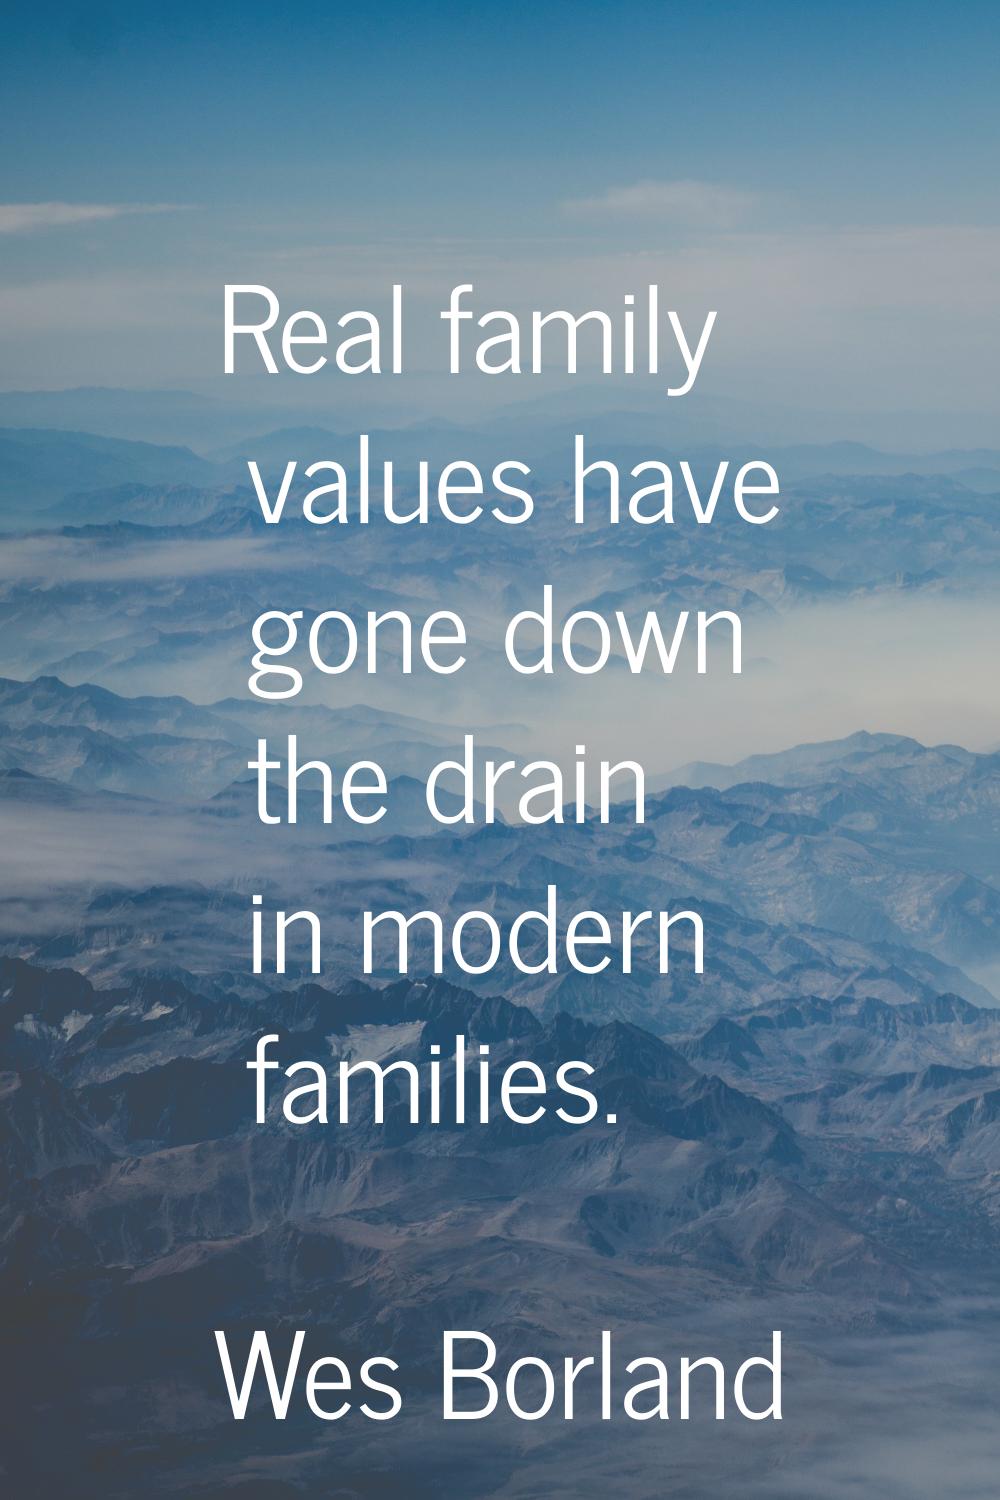 Real family values have gone down the drain in modern families.